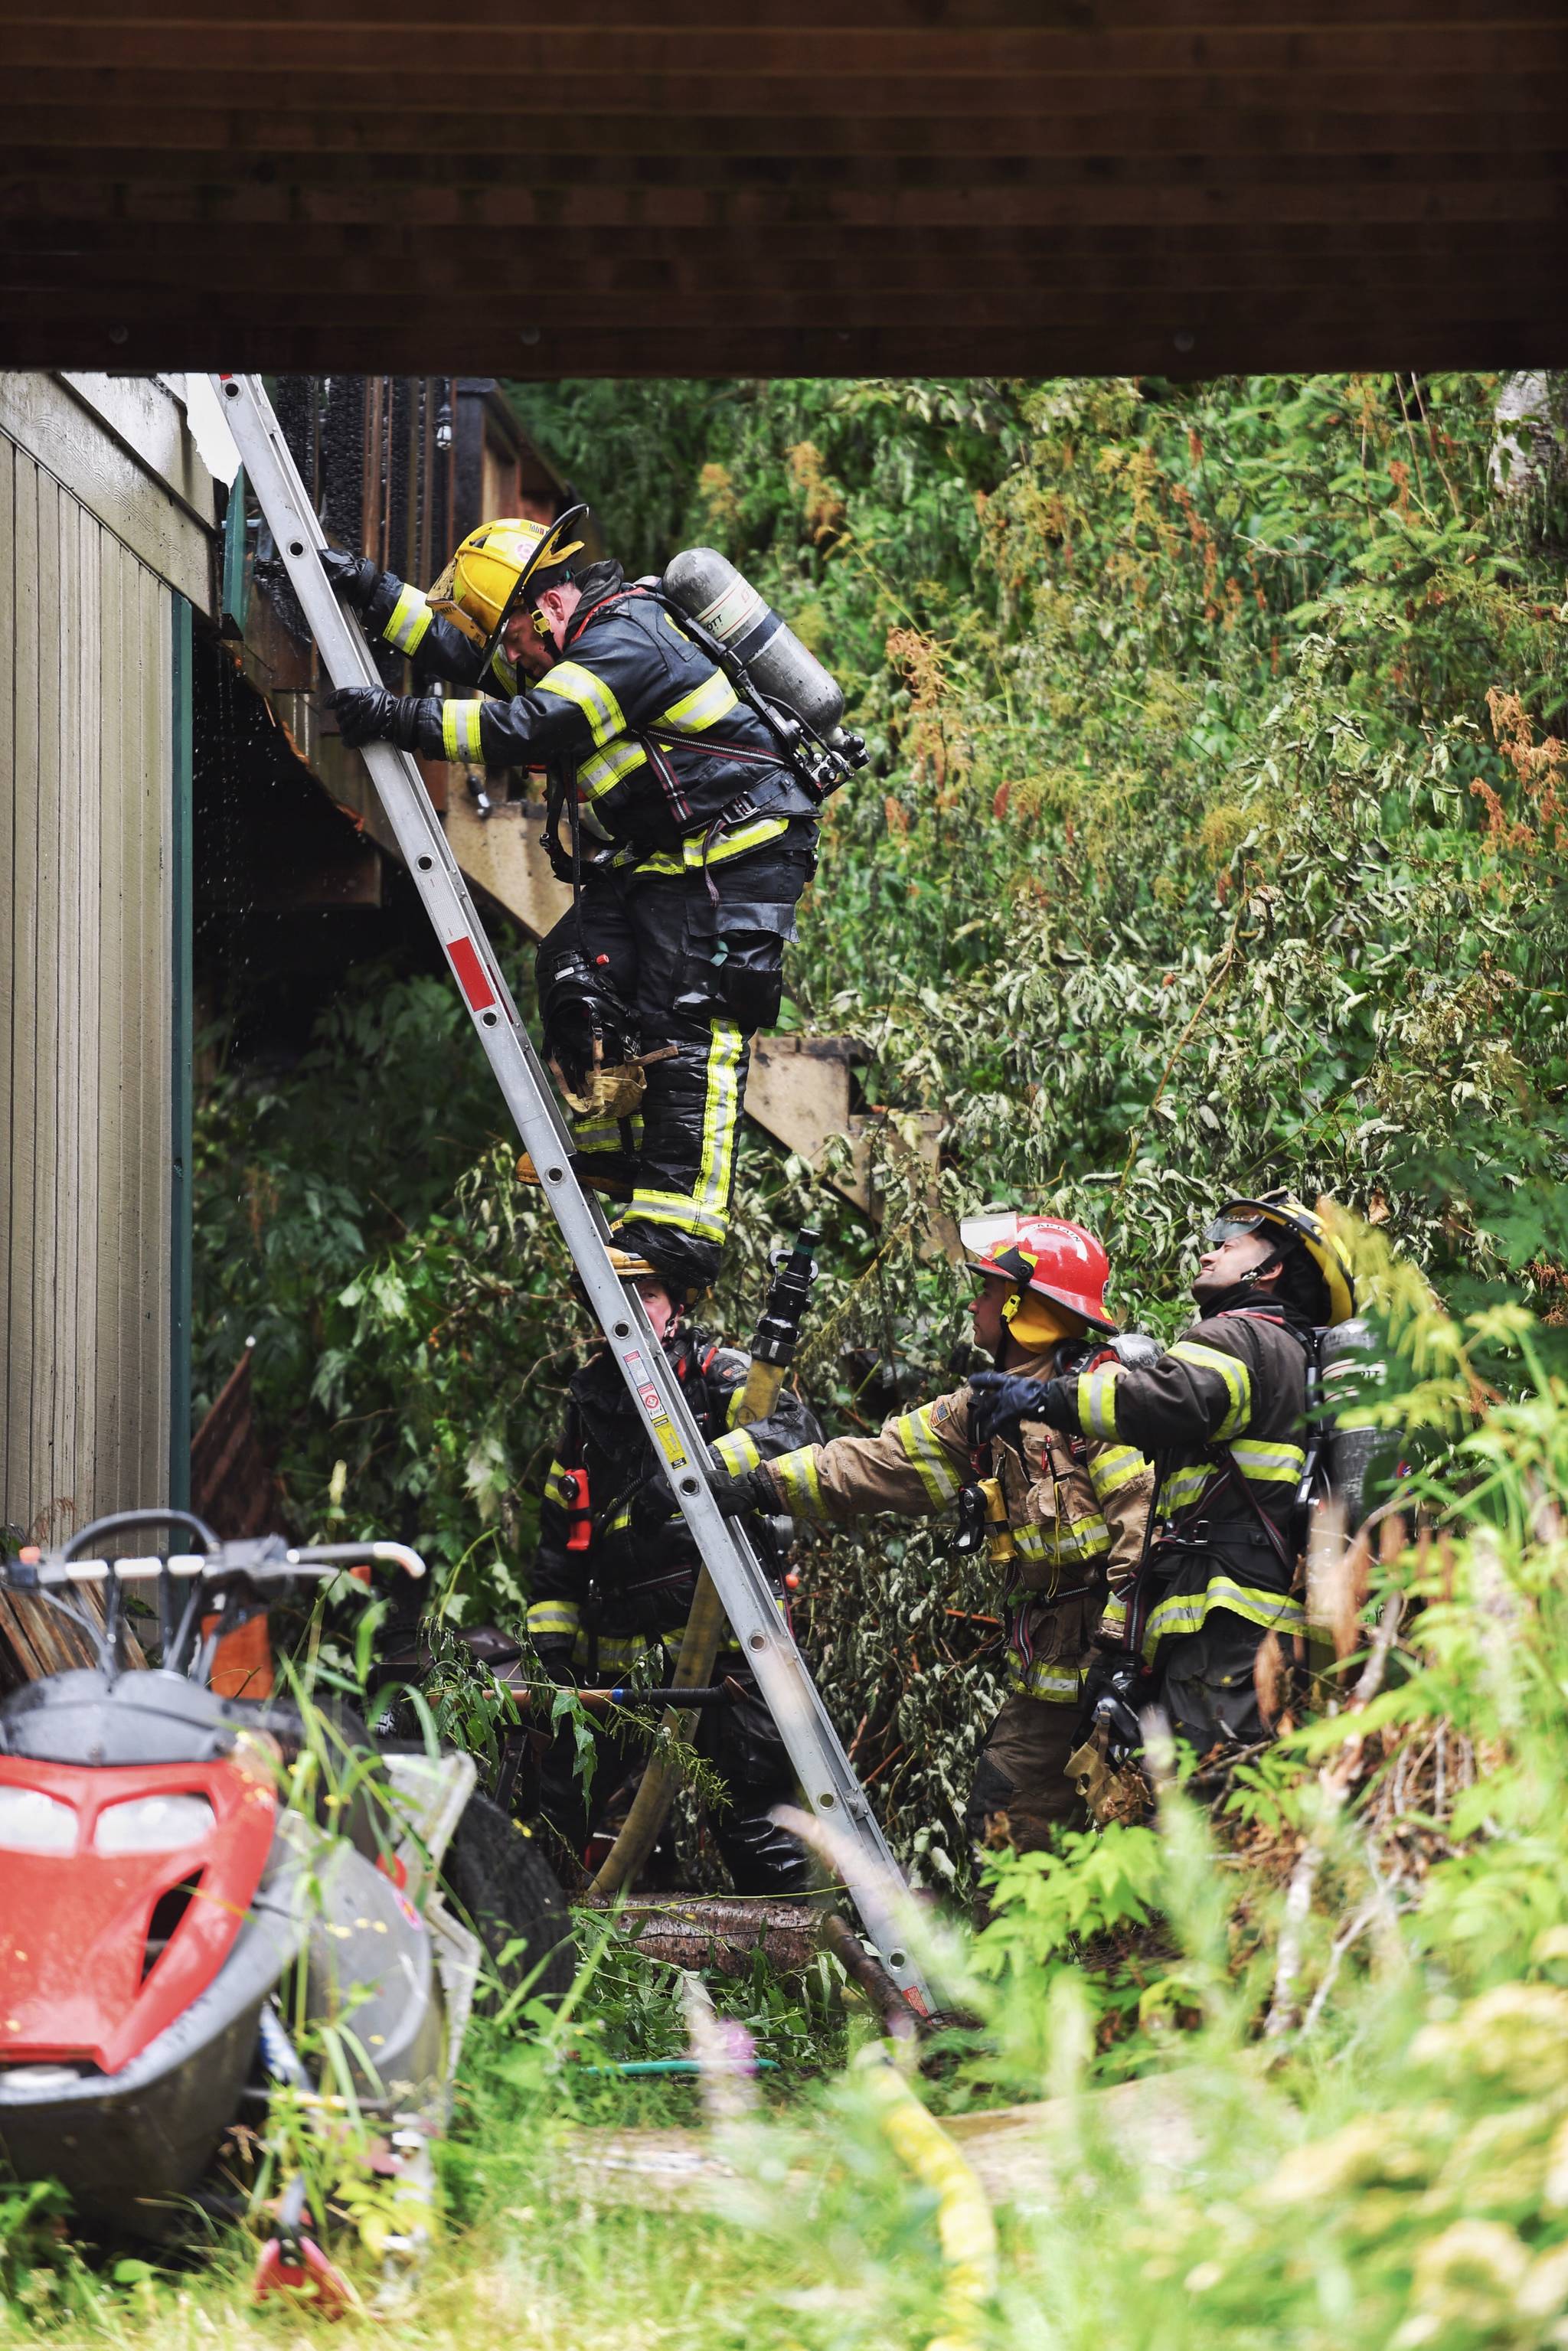 Capital City Fire/Rescue responds to a house fire at 2999 Foster Avenue on Thursday, July 11, 2019. (Michael Penn| Juneau Empire)